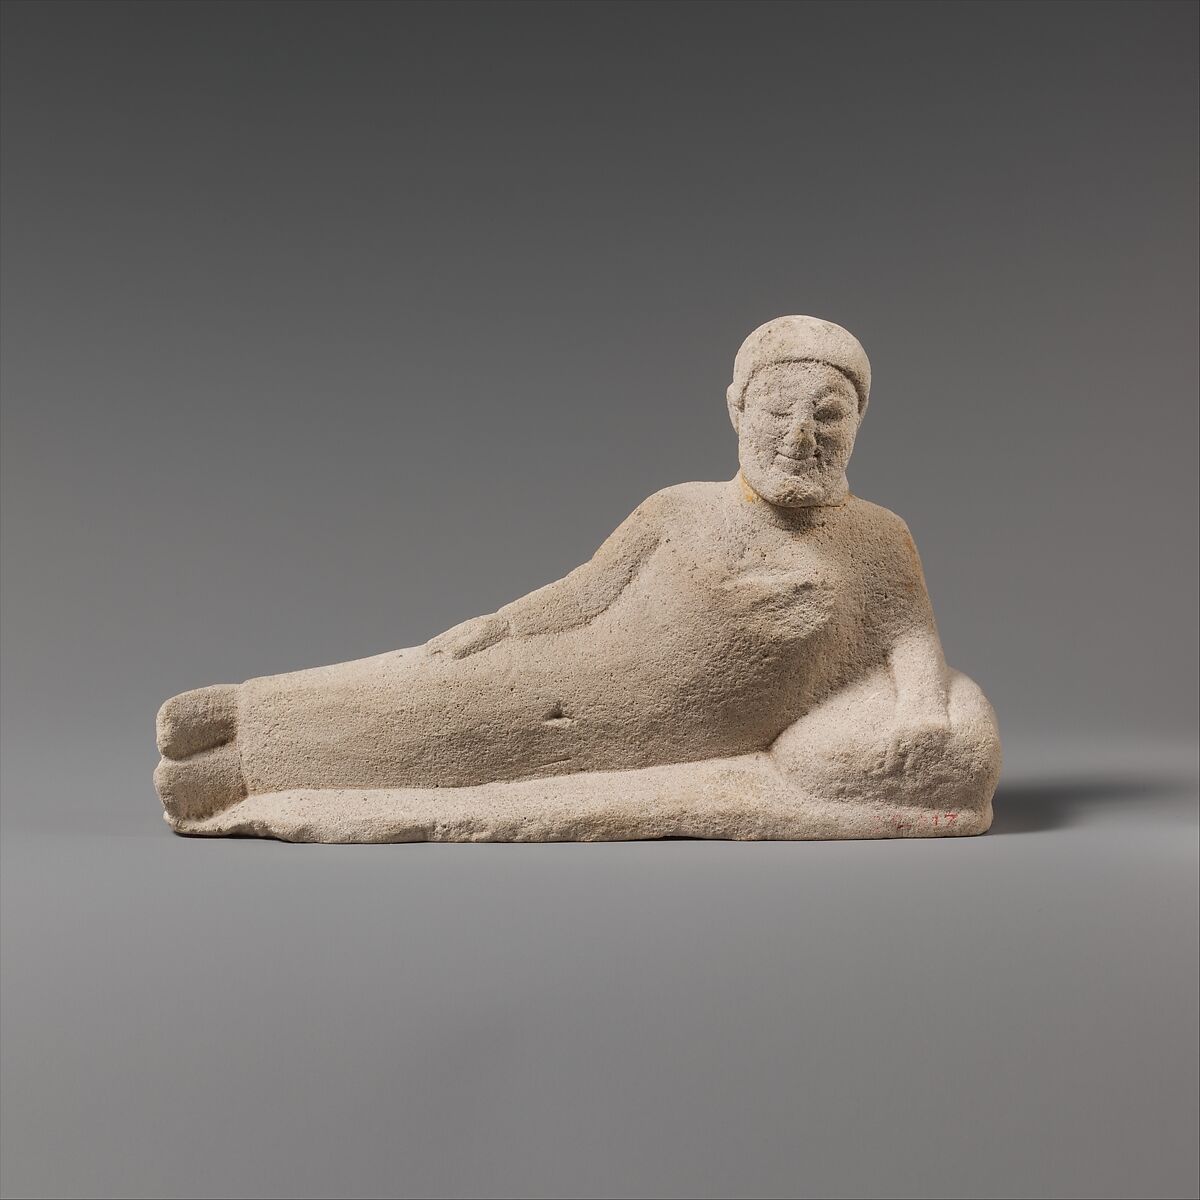 Limestone statuette of a reclining banqueter, Limestone, Cypriot 